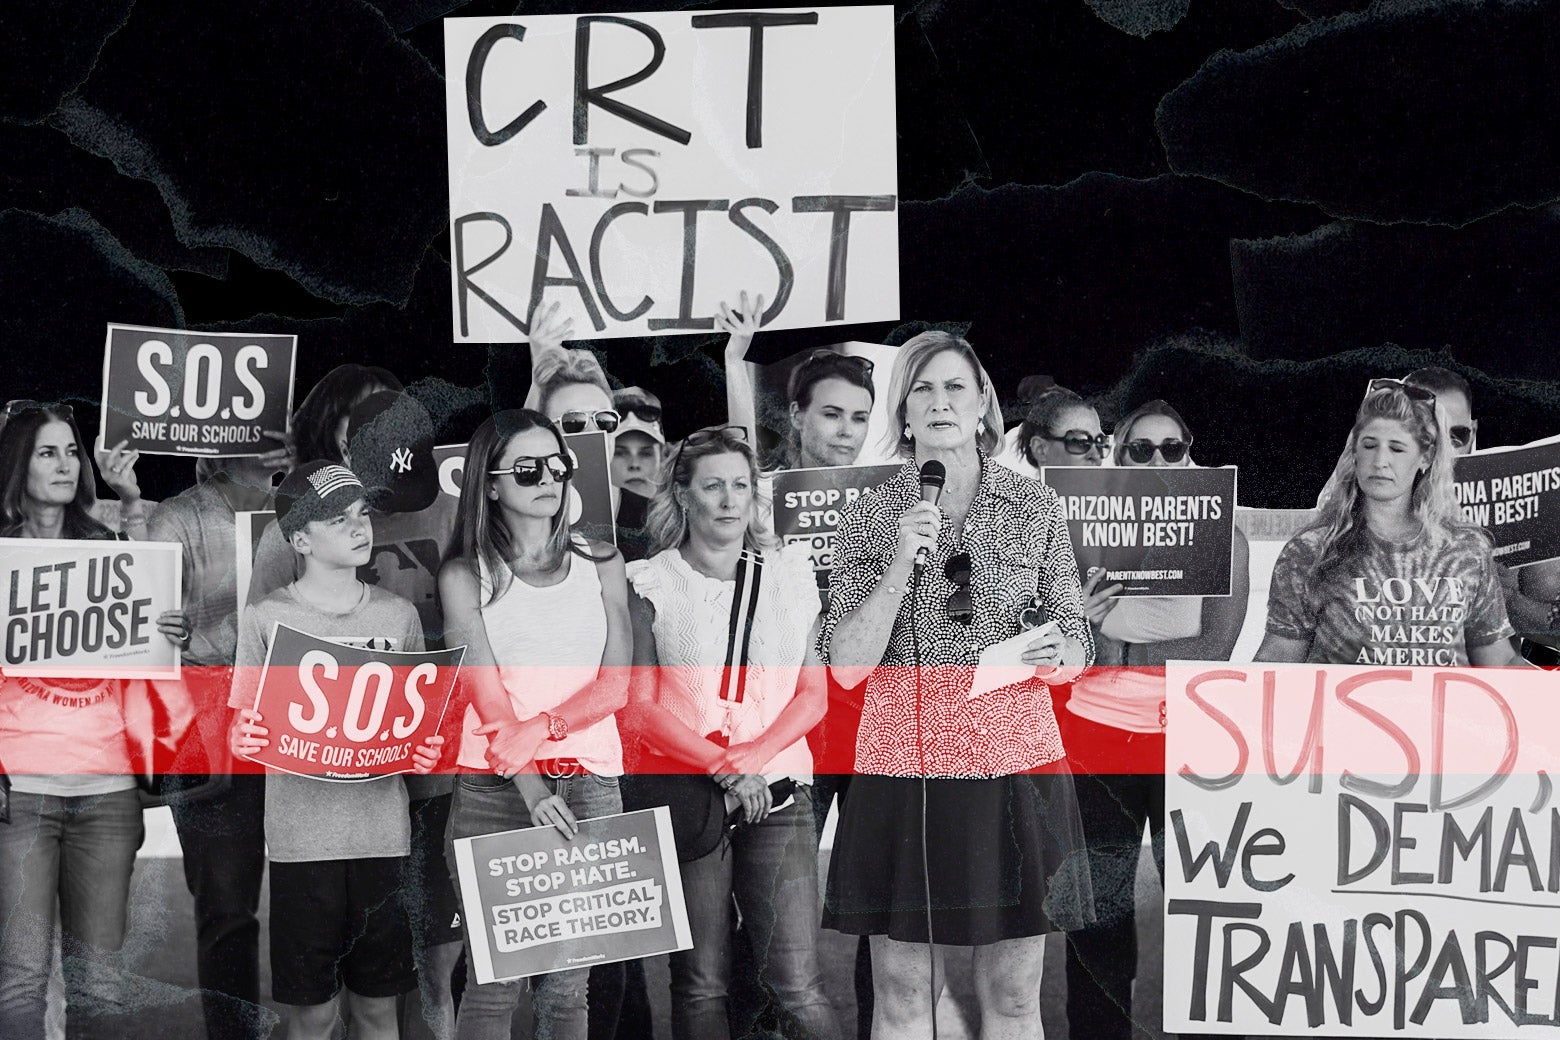 Anti–critical race theory protesters.